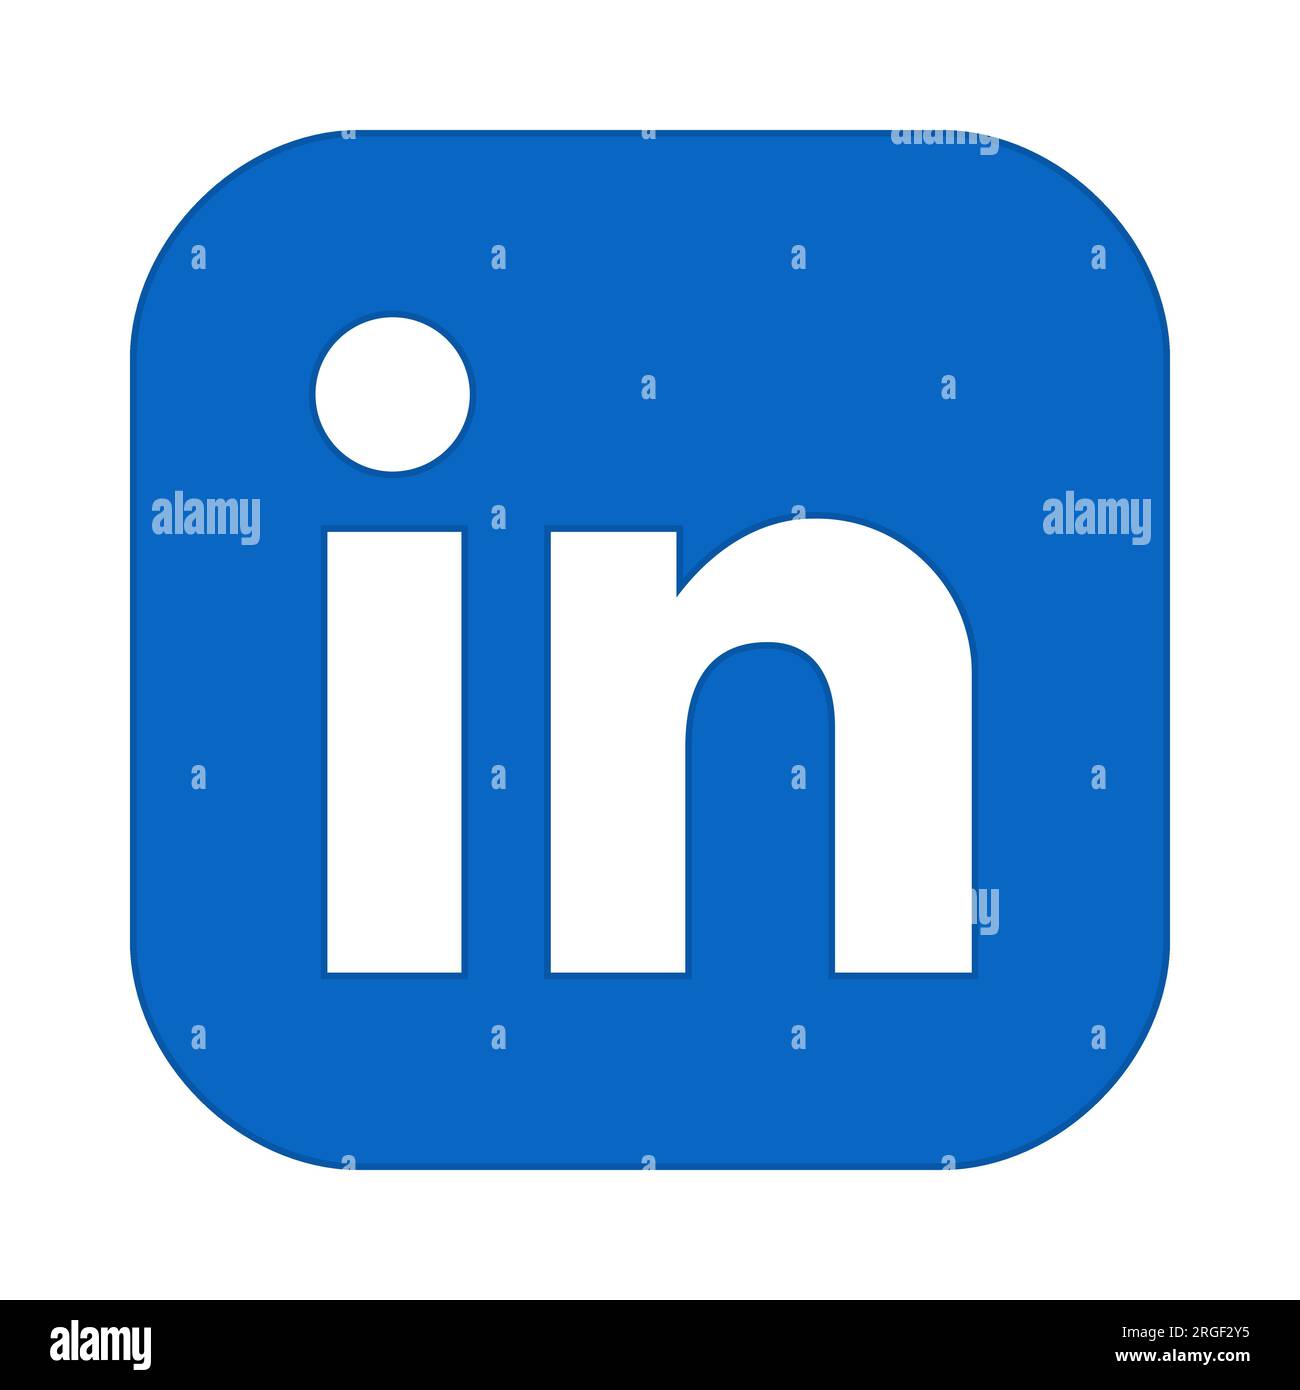 LinkedIn app icon. The world's largest professional network. Social networking. Jobs and careers Stock Vector